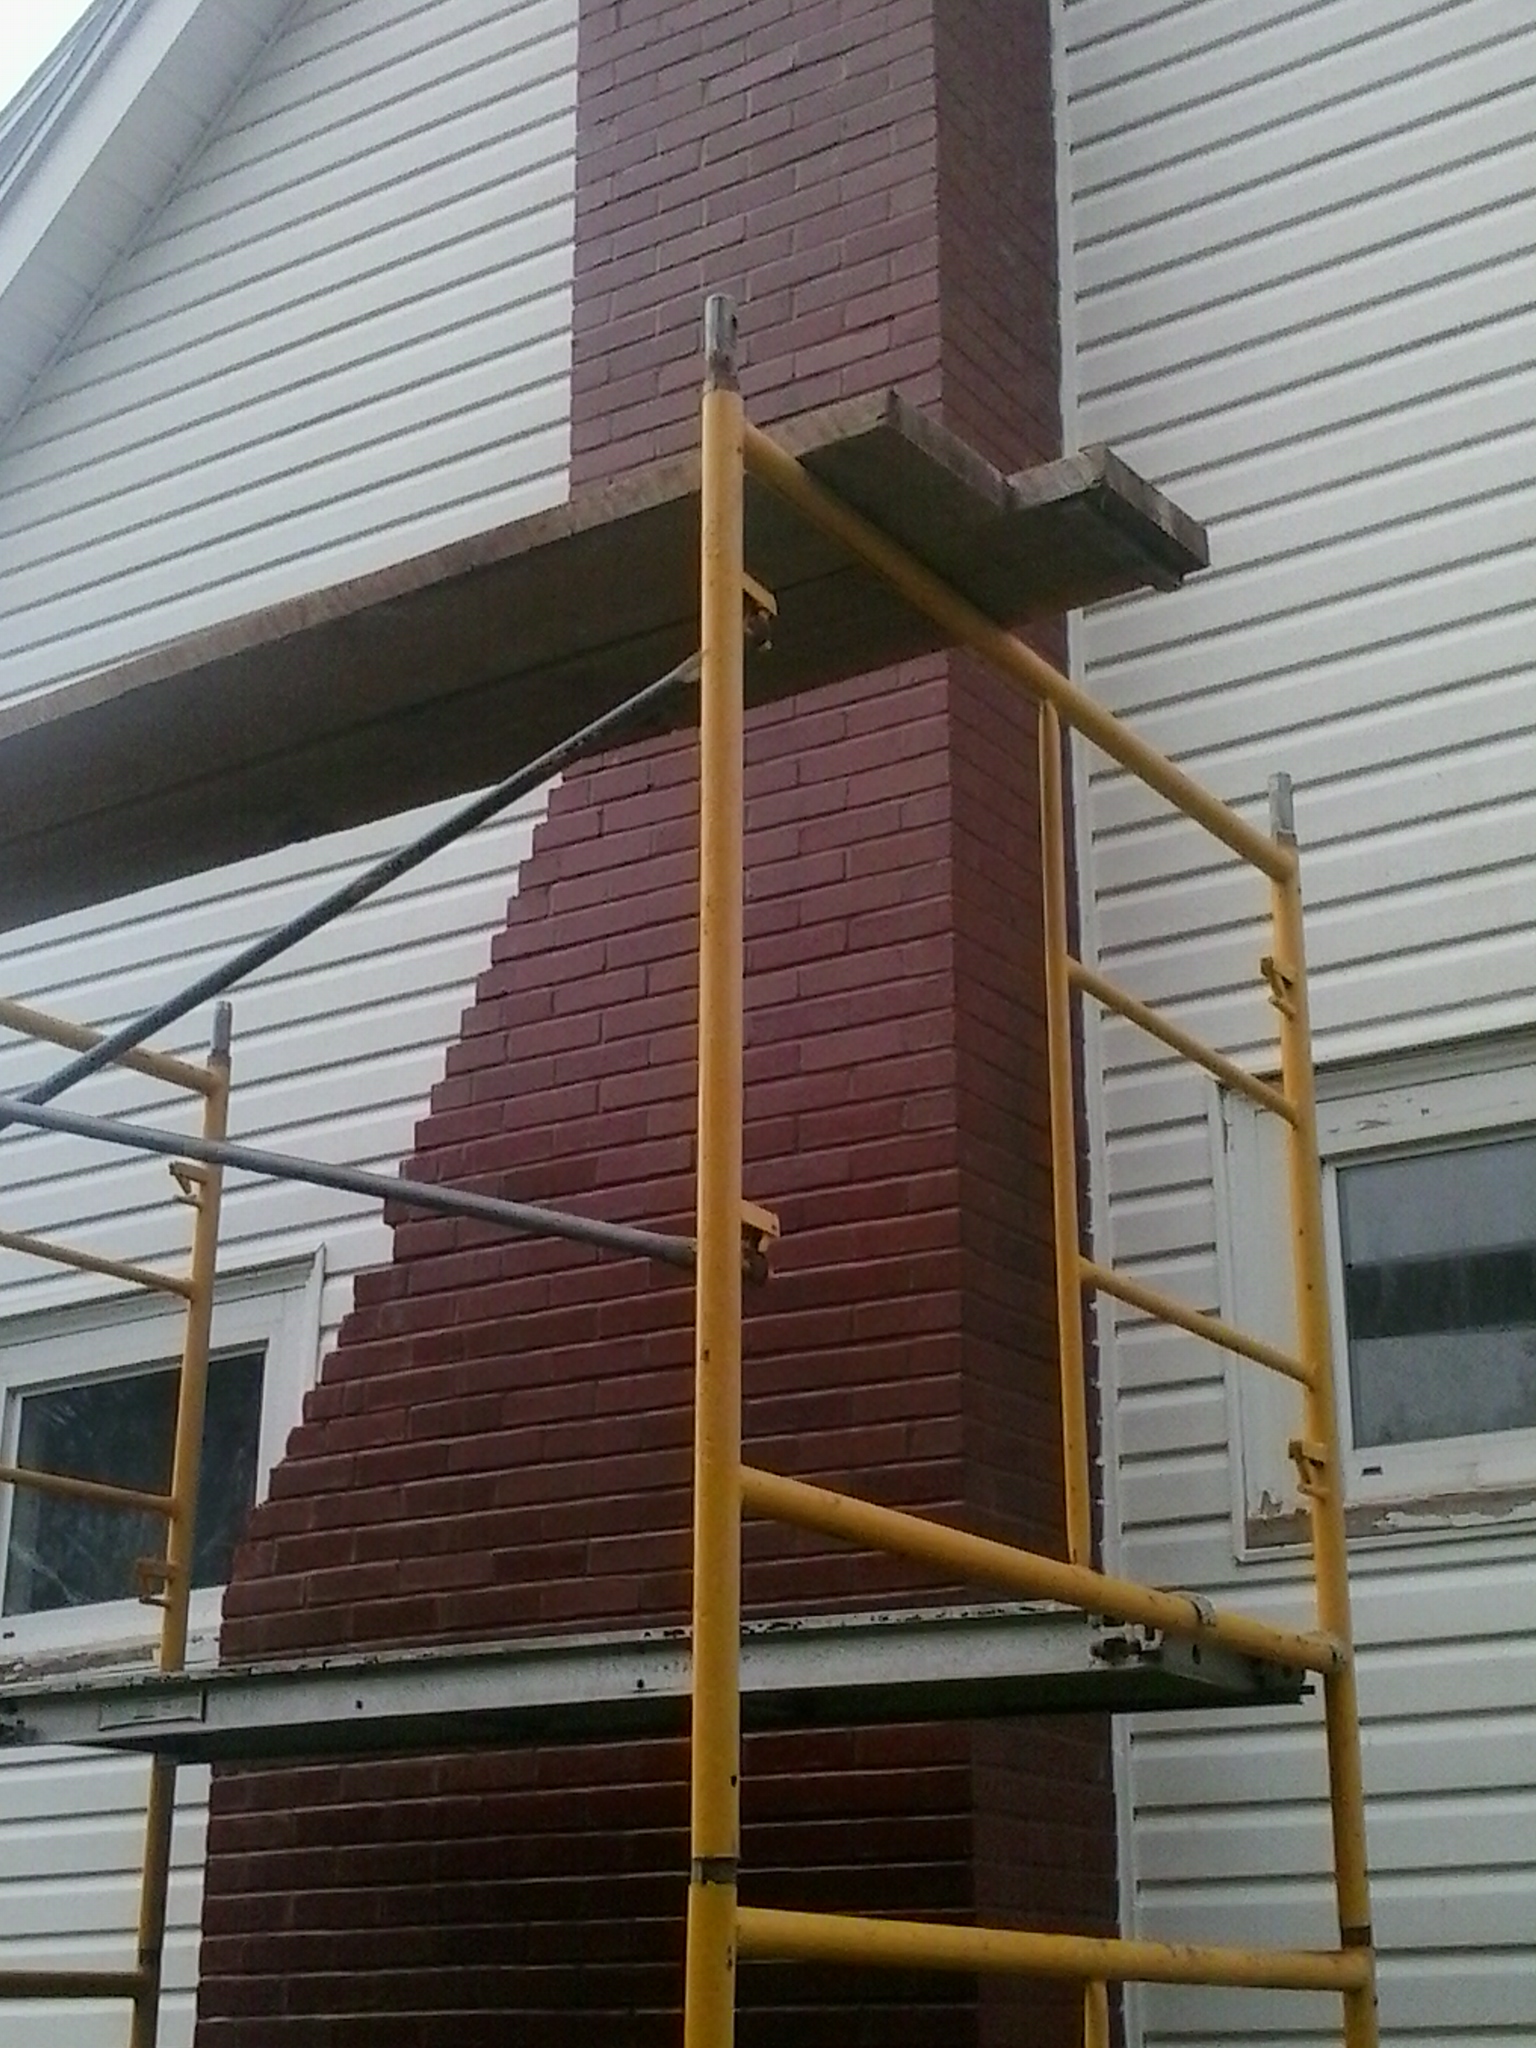 image of chimney-chimney repair services completed in the Halifax-Dartmouth Regional Municipality, NS by Pro Chimney Services based in Halifax, NS servicing all of the Halifax-Dartmouth Regional Municipality, Bedford, Sackville, Mount Uniacke, Windsor, Hantsport, Wolfville, Kentville, Chester, Mahone Bay, Lunenburg, Bridgewater, Liverpool, Fall River, Wellington, Enfield, Elmsdale, Brookfield, Truro, Musquodoboit Harbour & surrounding areas.